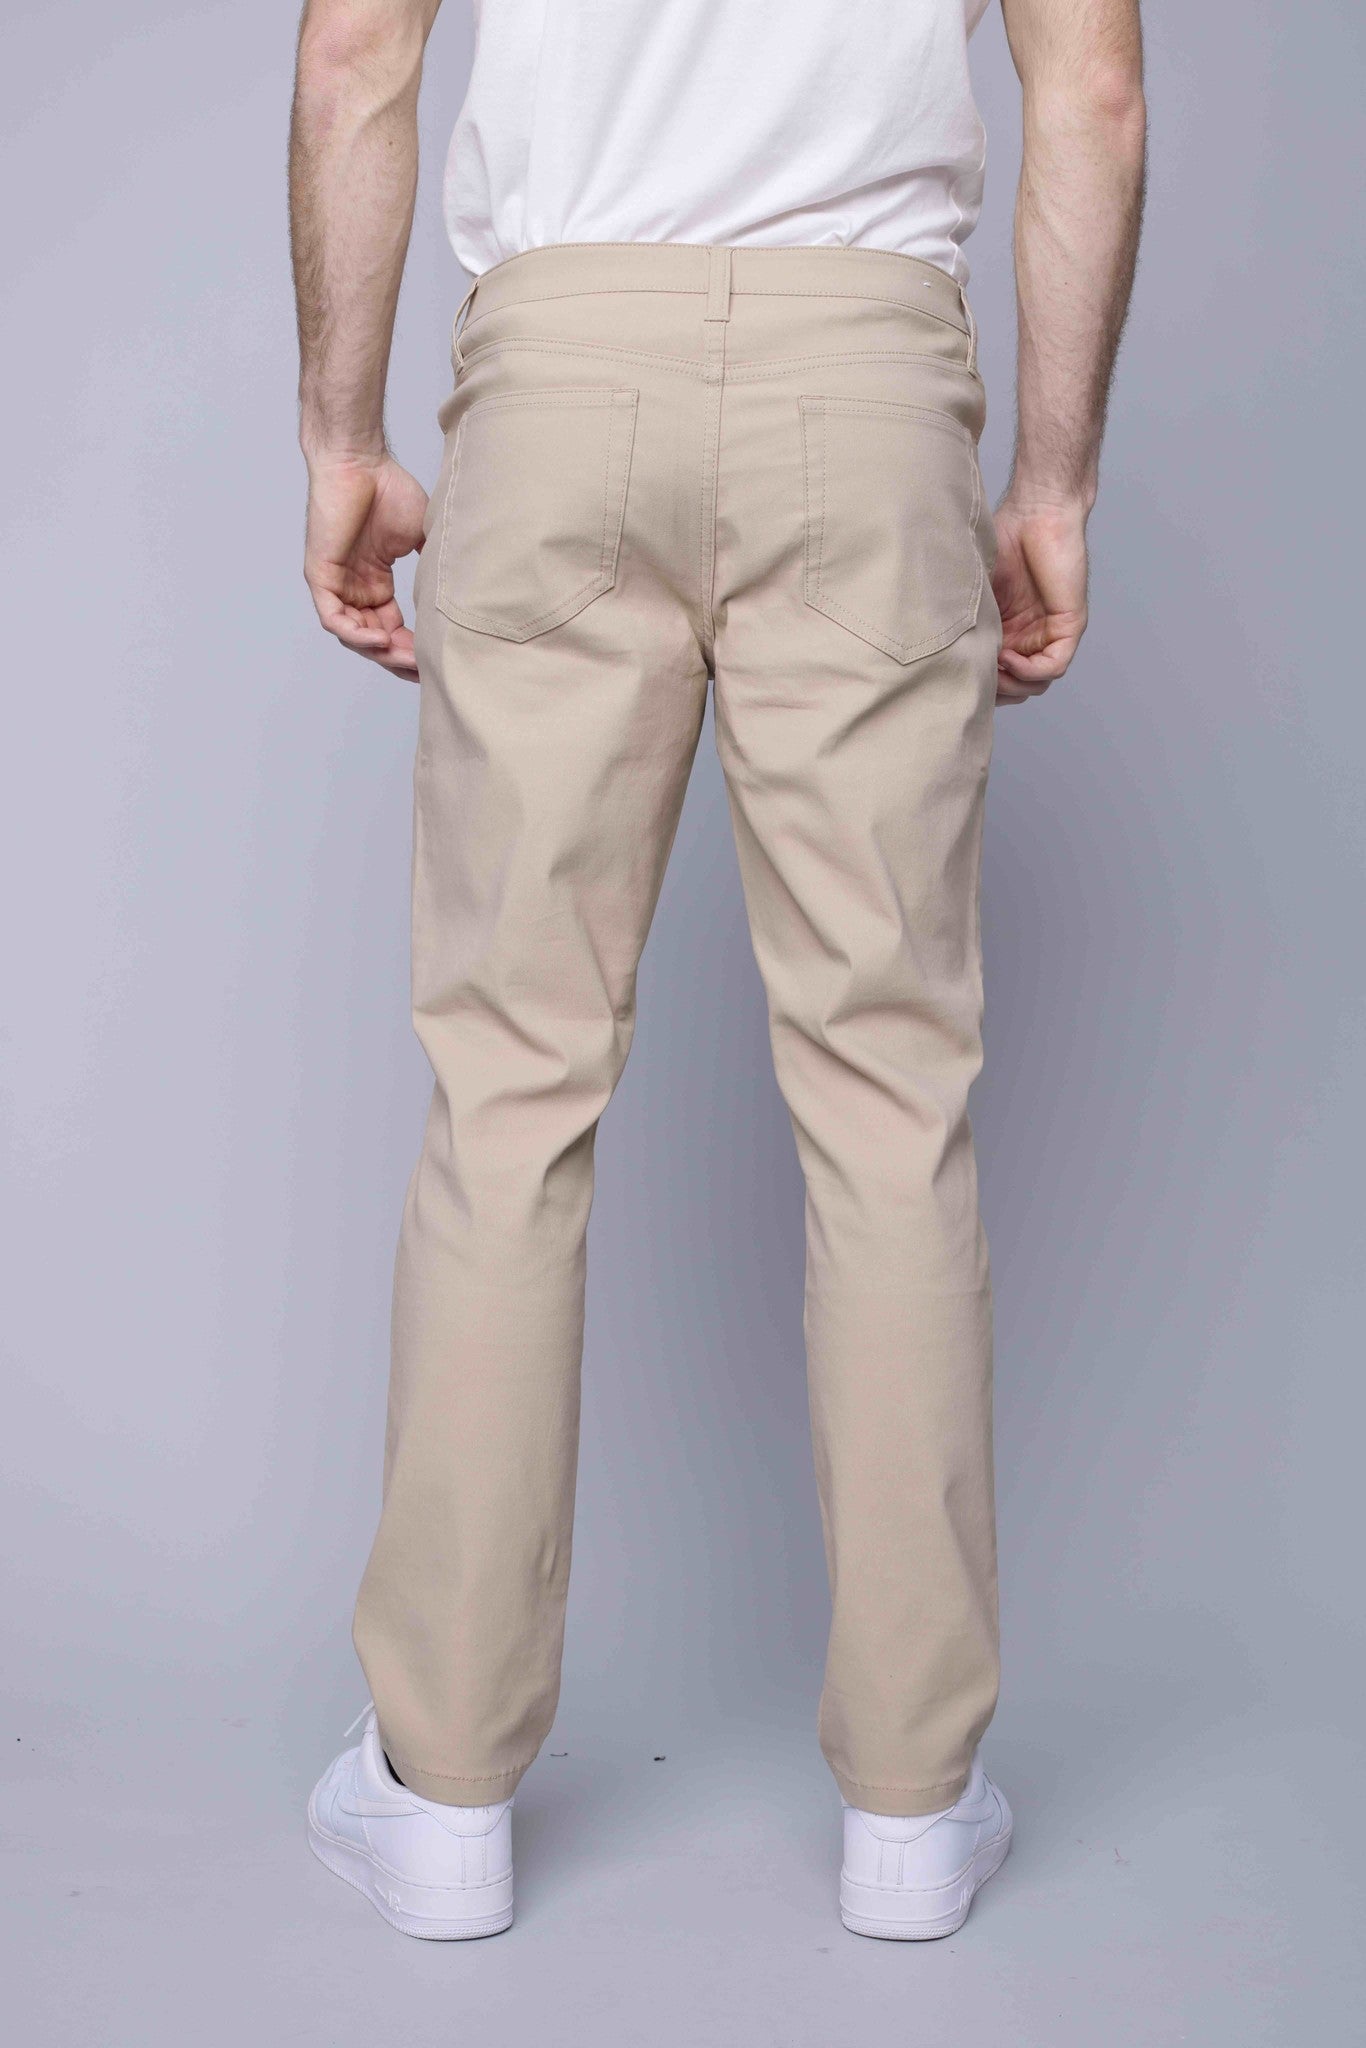 HEDGE Woven Pant